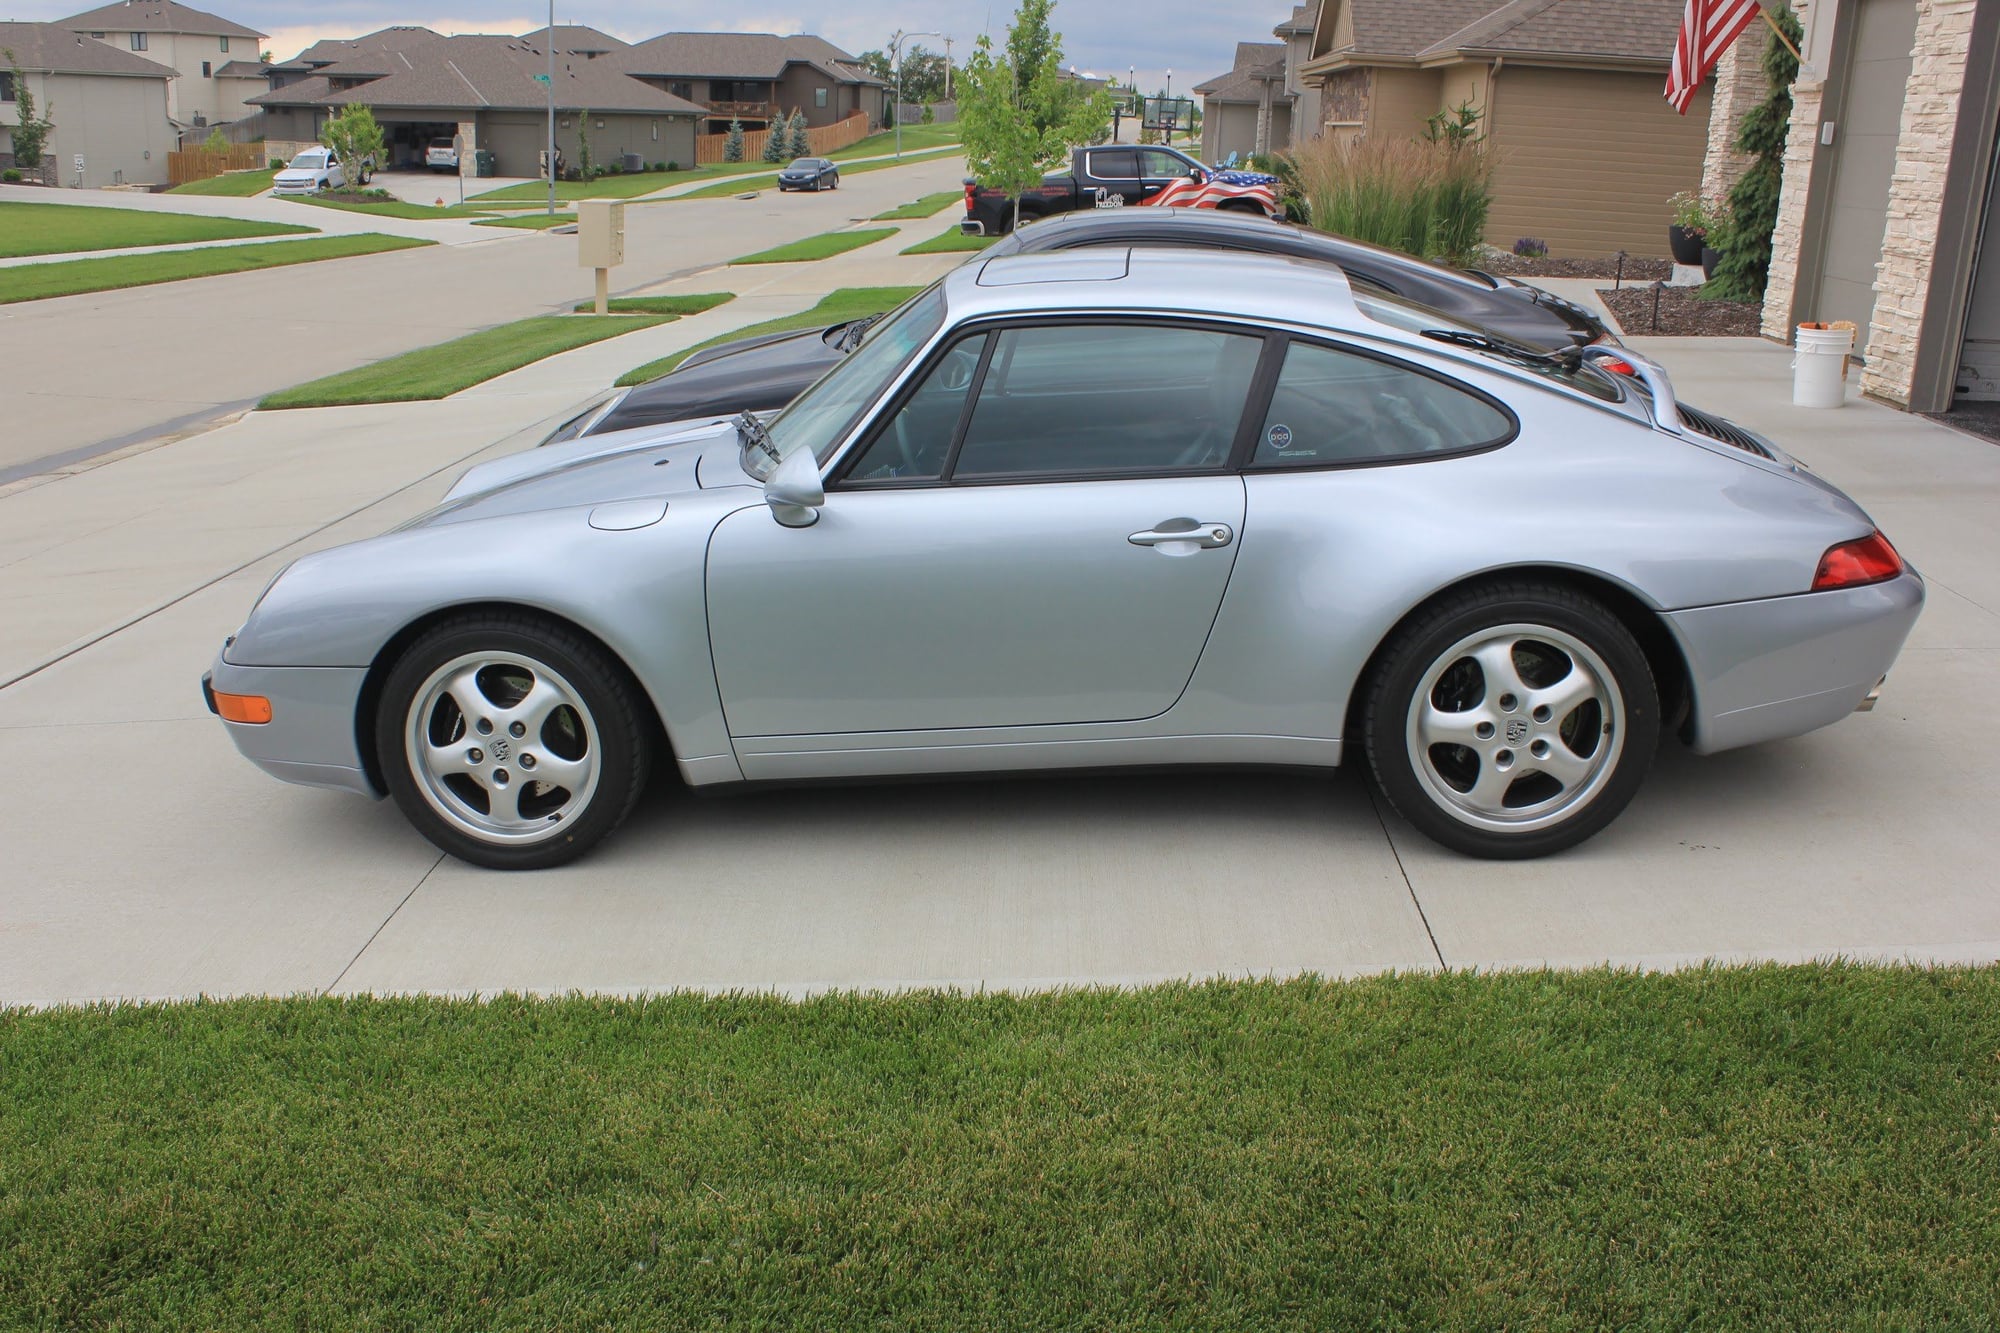 1995 Porsche 911 - 1995 Carrera - 6-speed - Polar Silver - Used - VIN wp0aa2990ss320828 - 97,700 Miles - 6 cyl - 2WD - Manual - Coupe - Silver - Omaha, NE 68022, United States